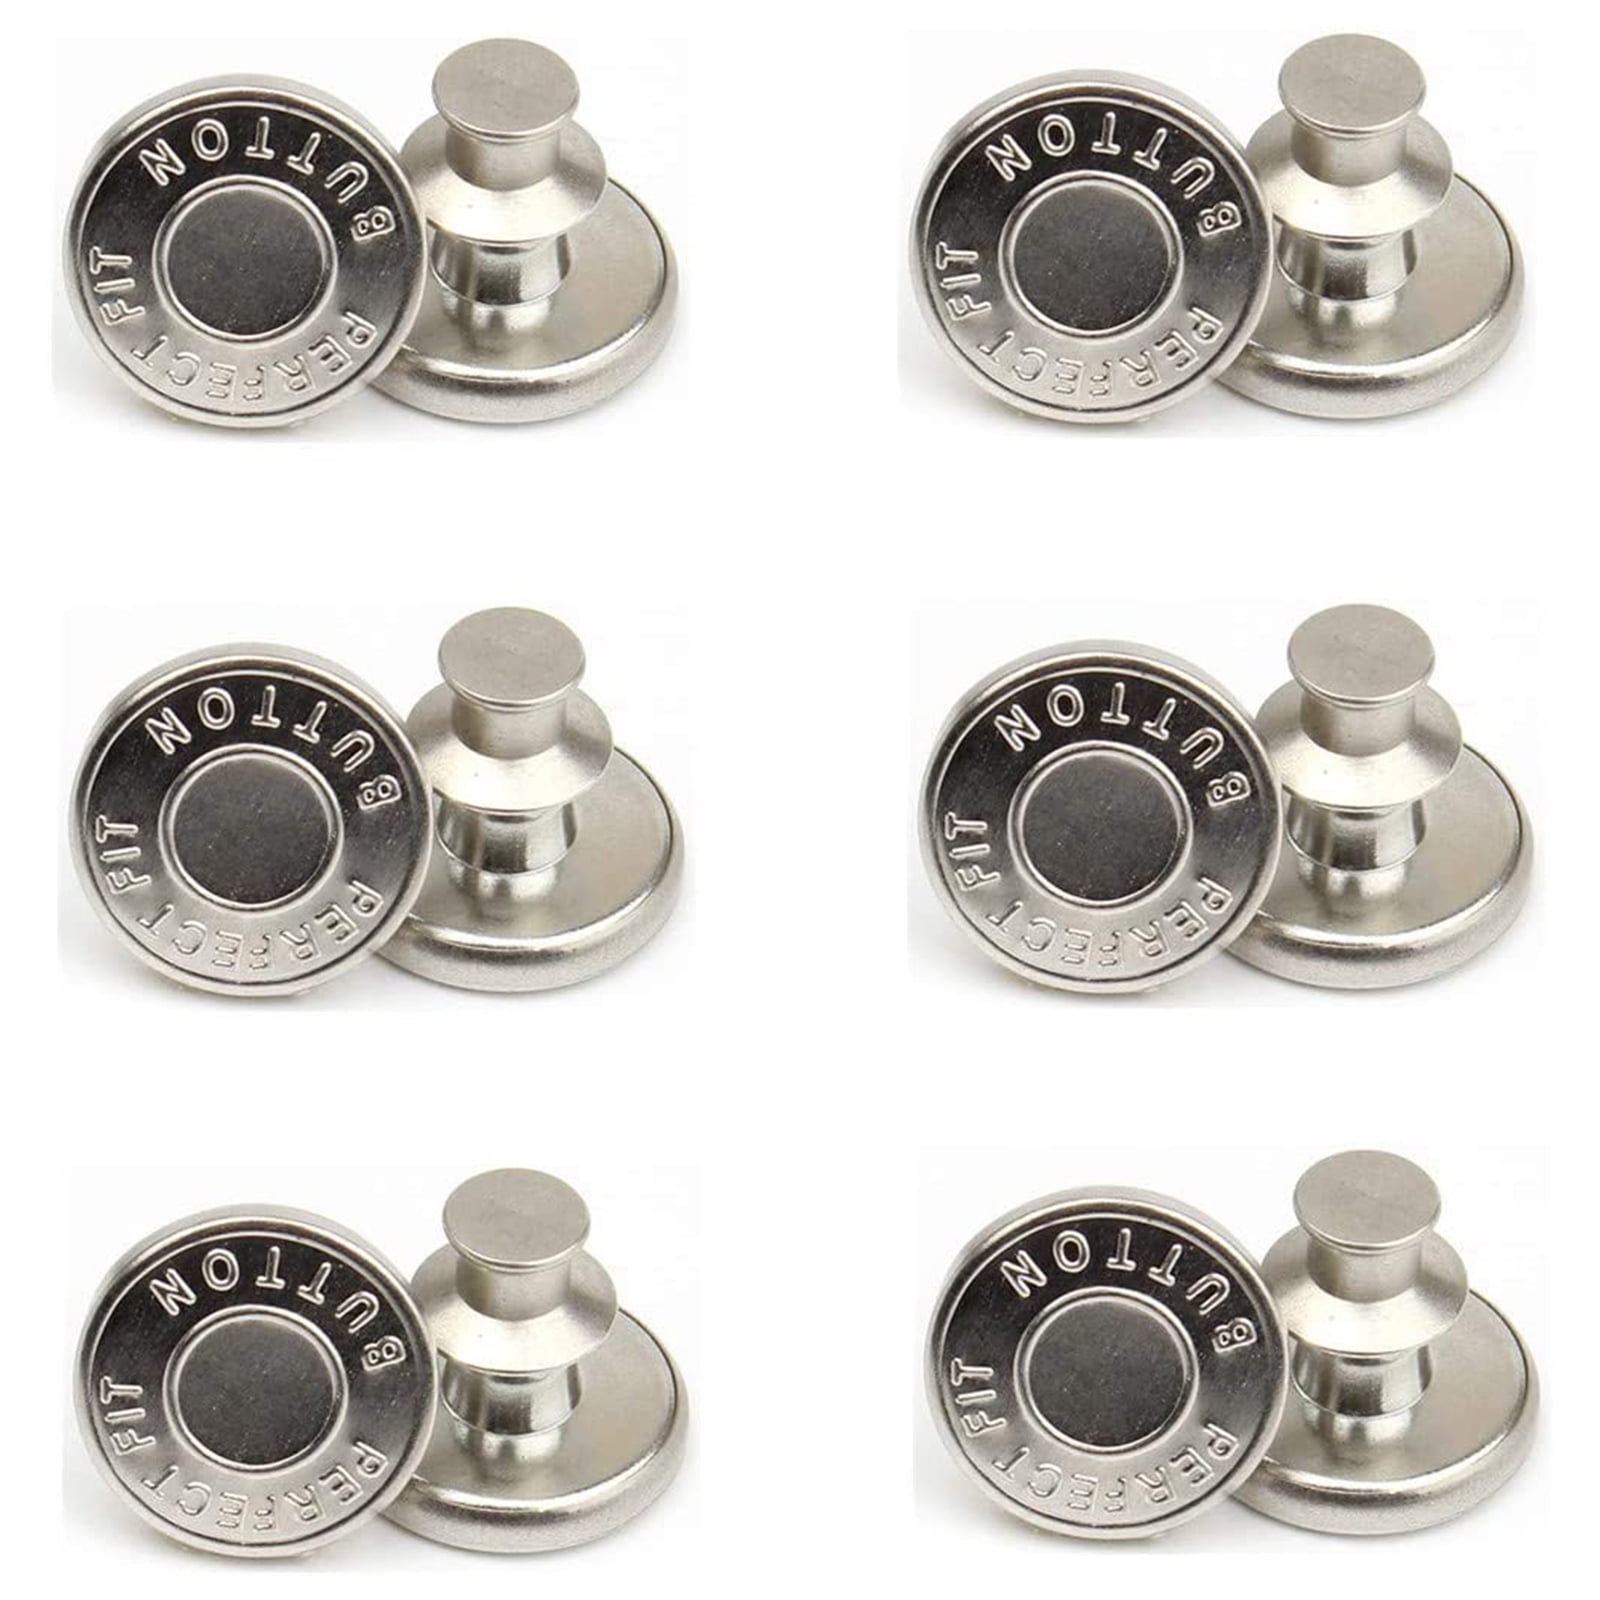 8PCS Replacement Buttons for Jeans Thin Waist No Sewing Required Accessories 4/8 PCS No Sew Instant Buttons 17mm Detachable Buttons Jeans Easy Clip Snap Button